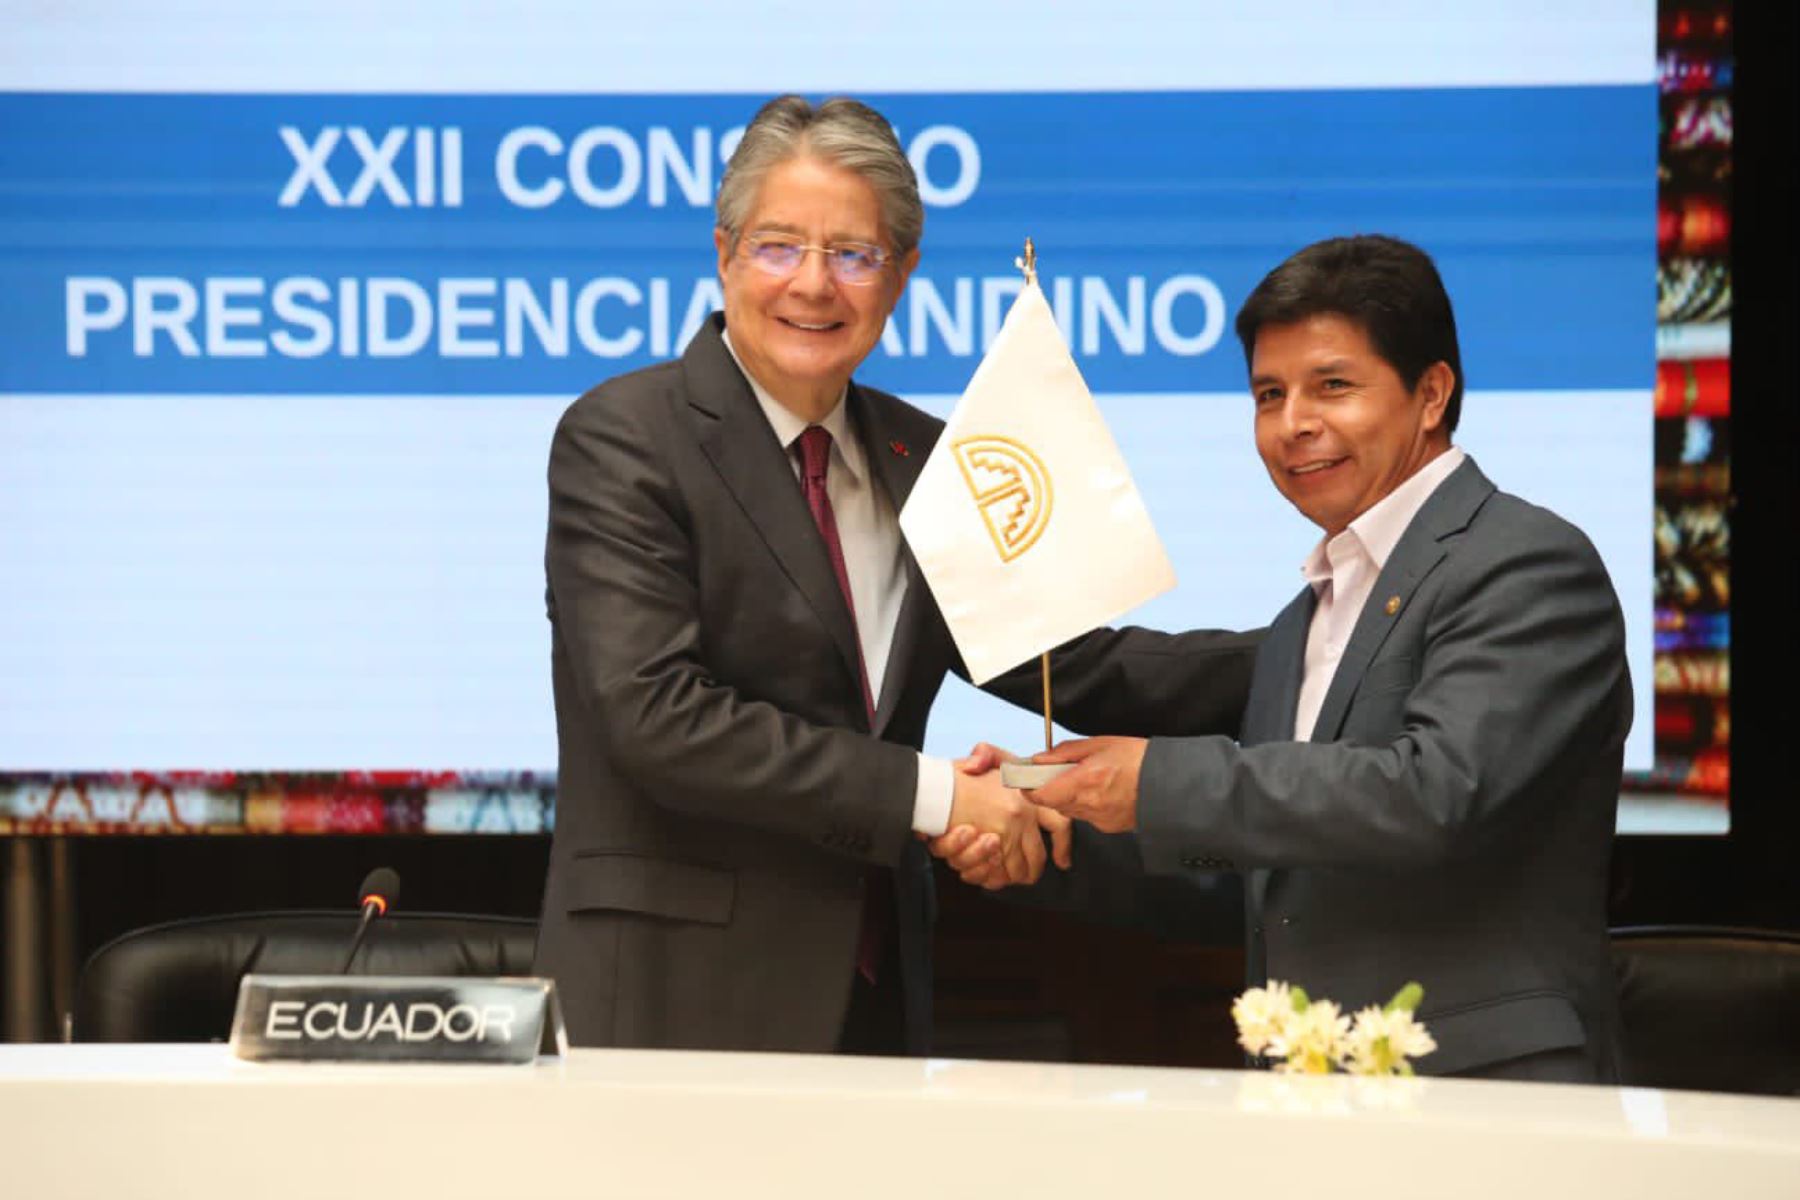 SELA salutes Pedro Castillo on taking over the presidency pro tempore of the Andean Community